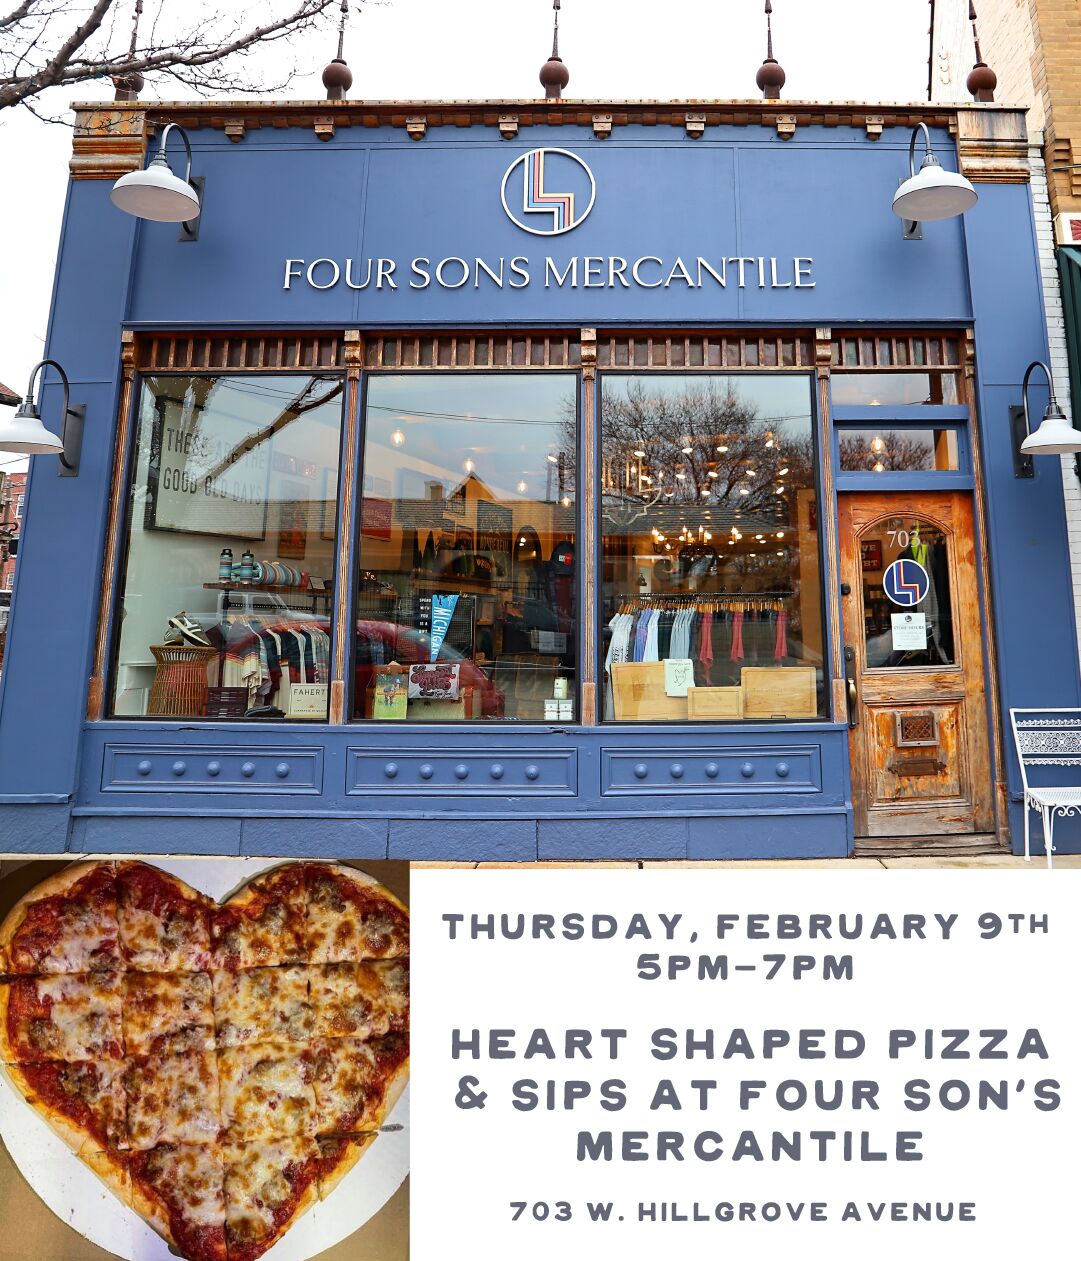 FOUR SONS MERCAN''ILE THURSDAY, FEBRUARY 9TH SPM-7PM HEART SHAPED PIZZA SIPS AT FOUR SON'S MERCANTILE 703 W. HILLGROVE AVENUE 